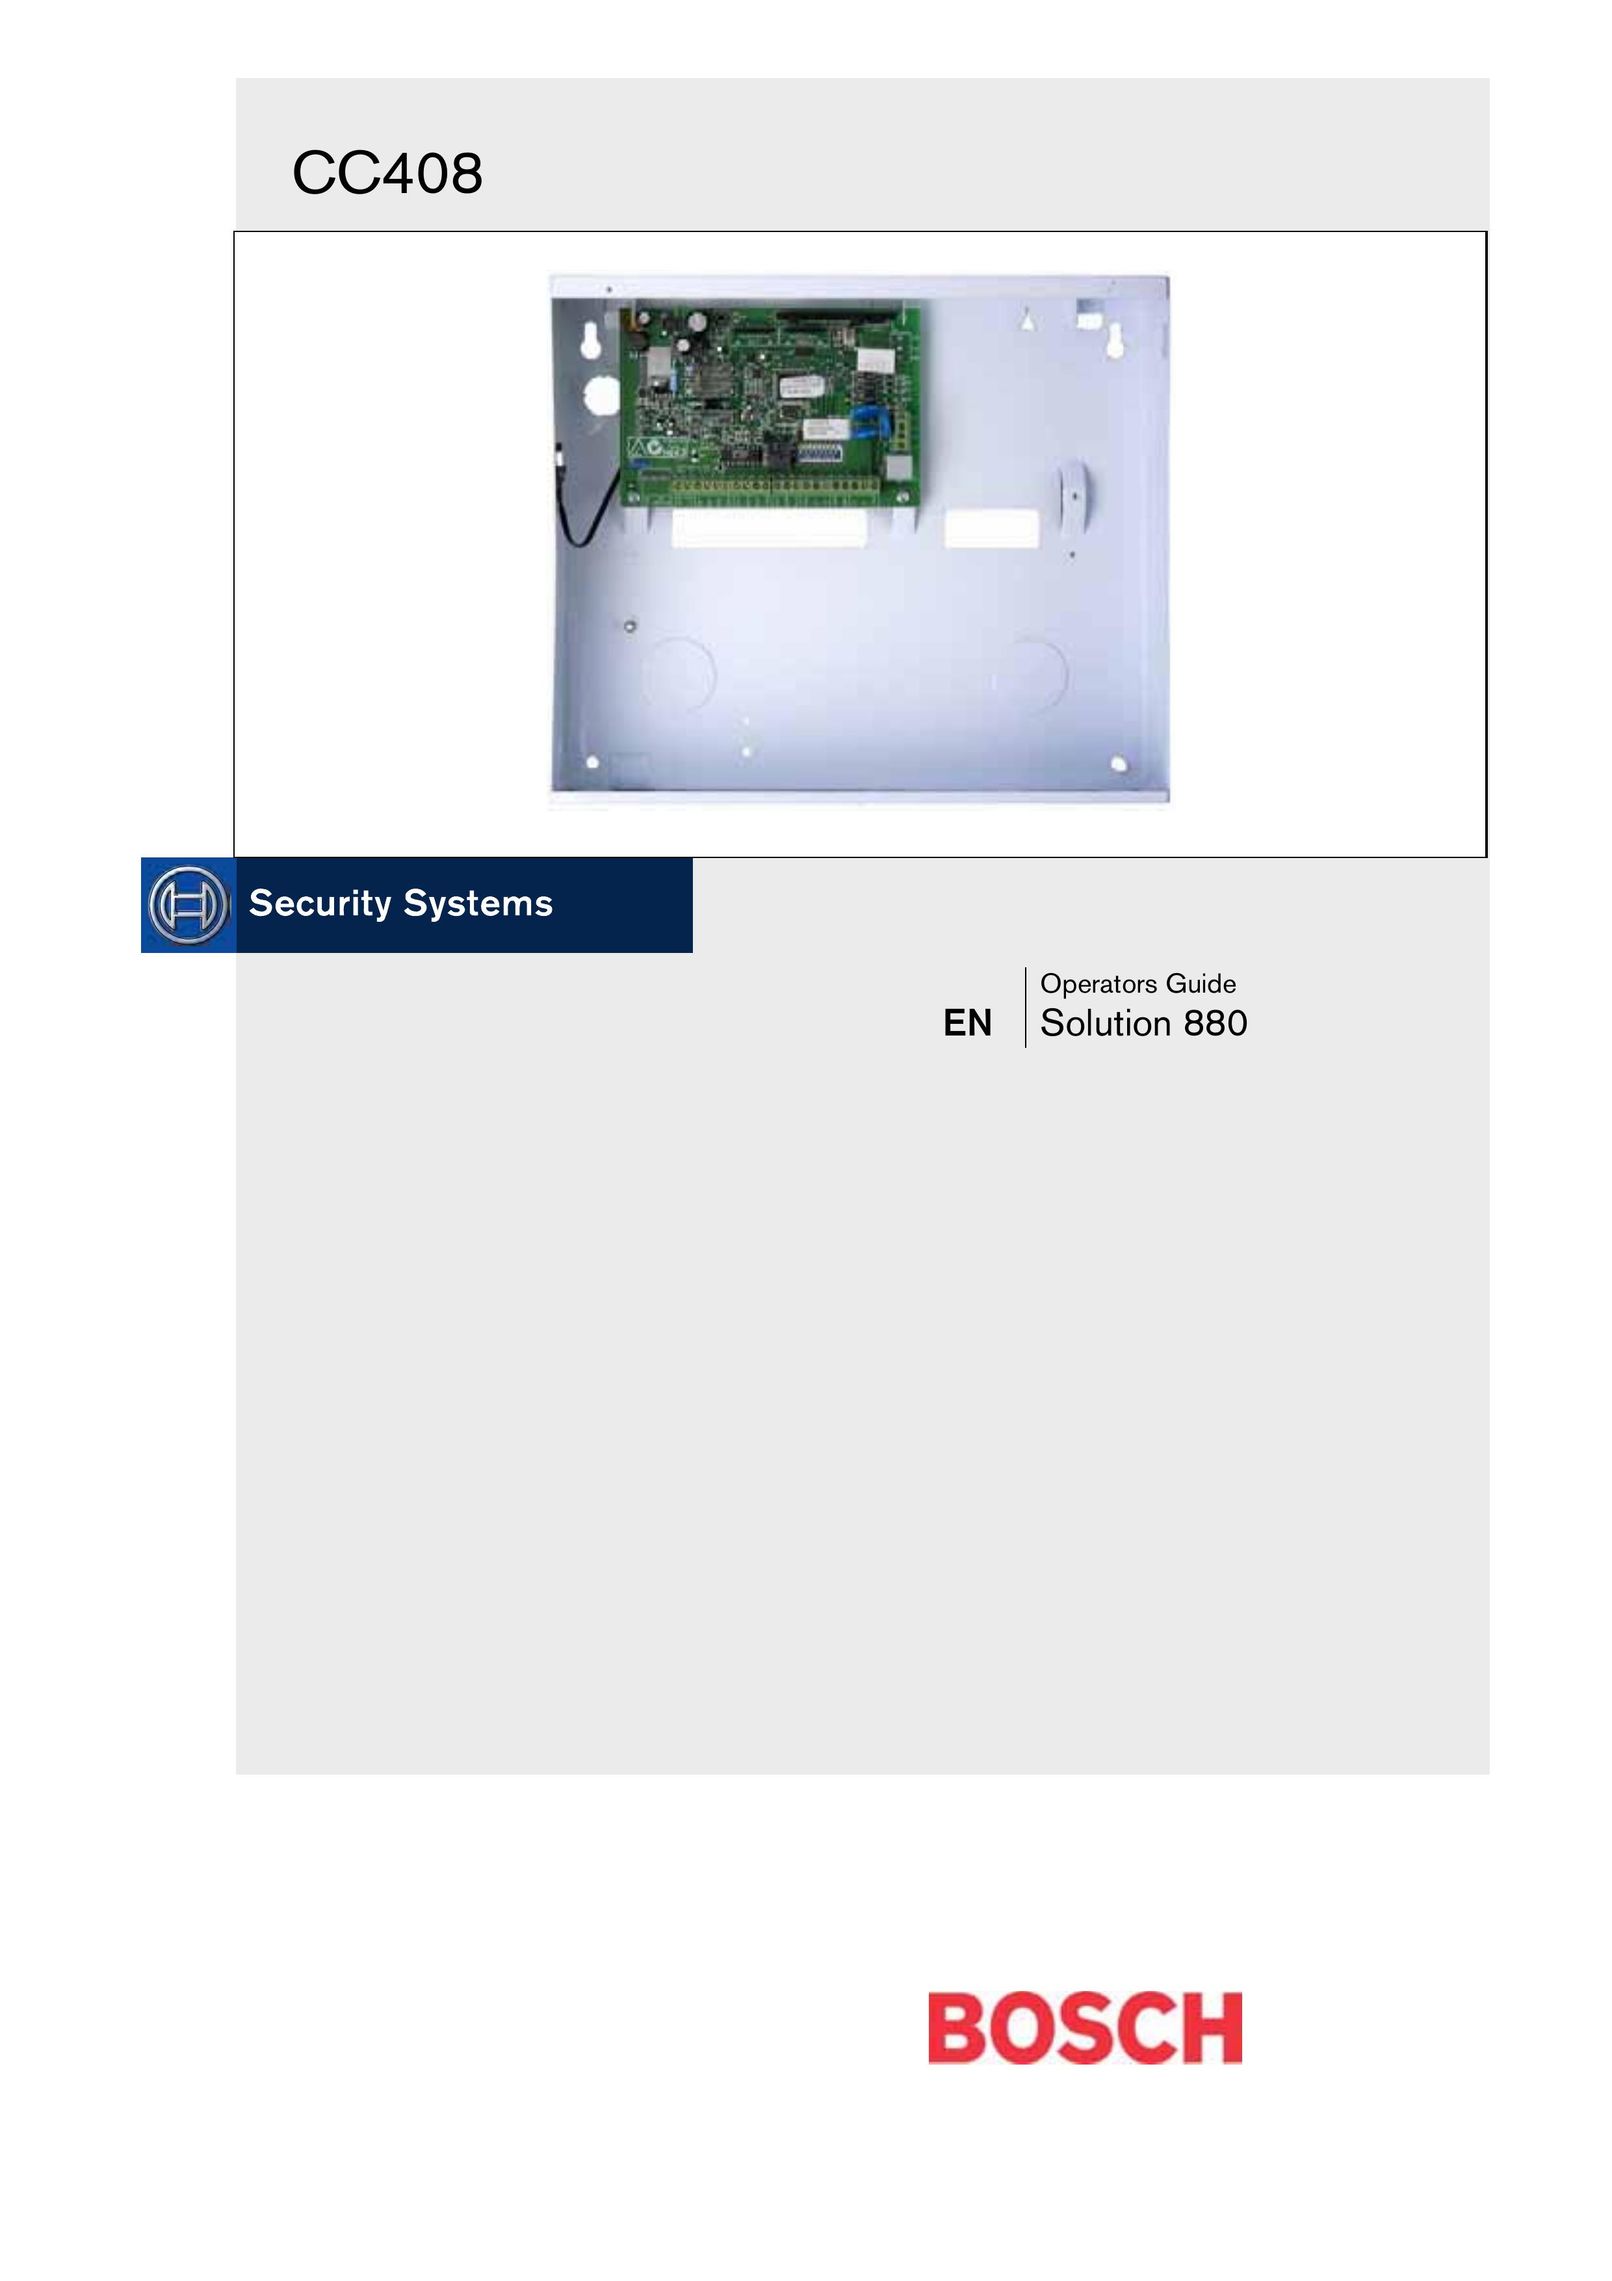 Bosch Appliances CC408 Home Security System User Manual